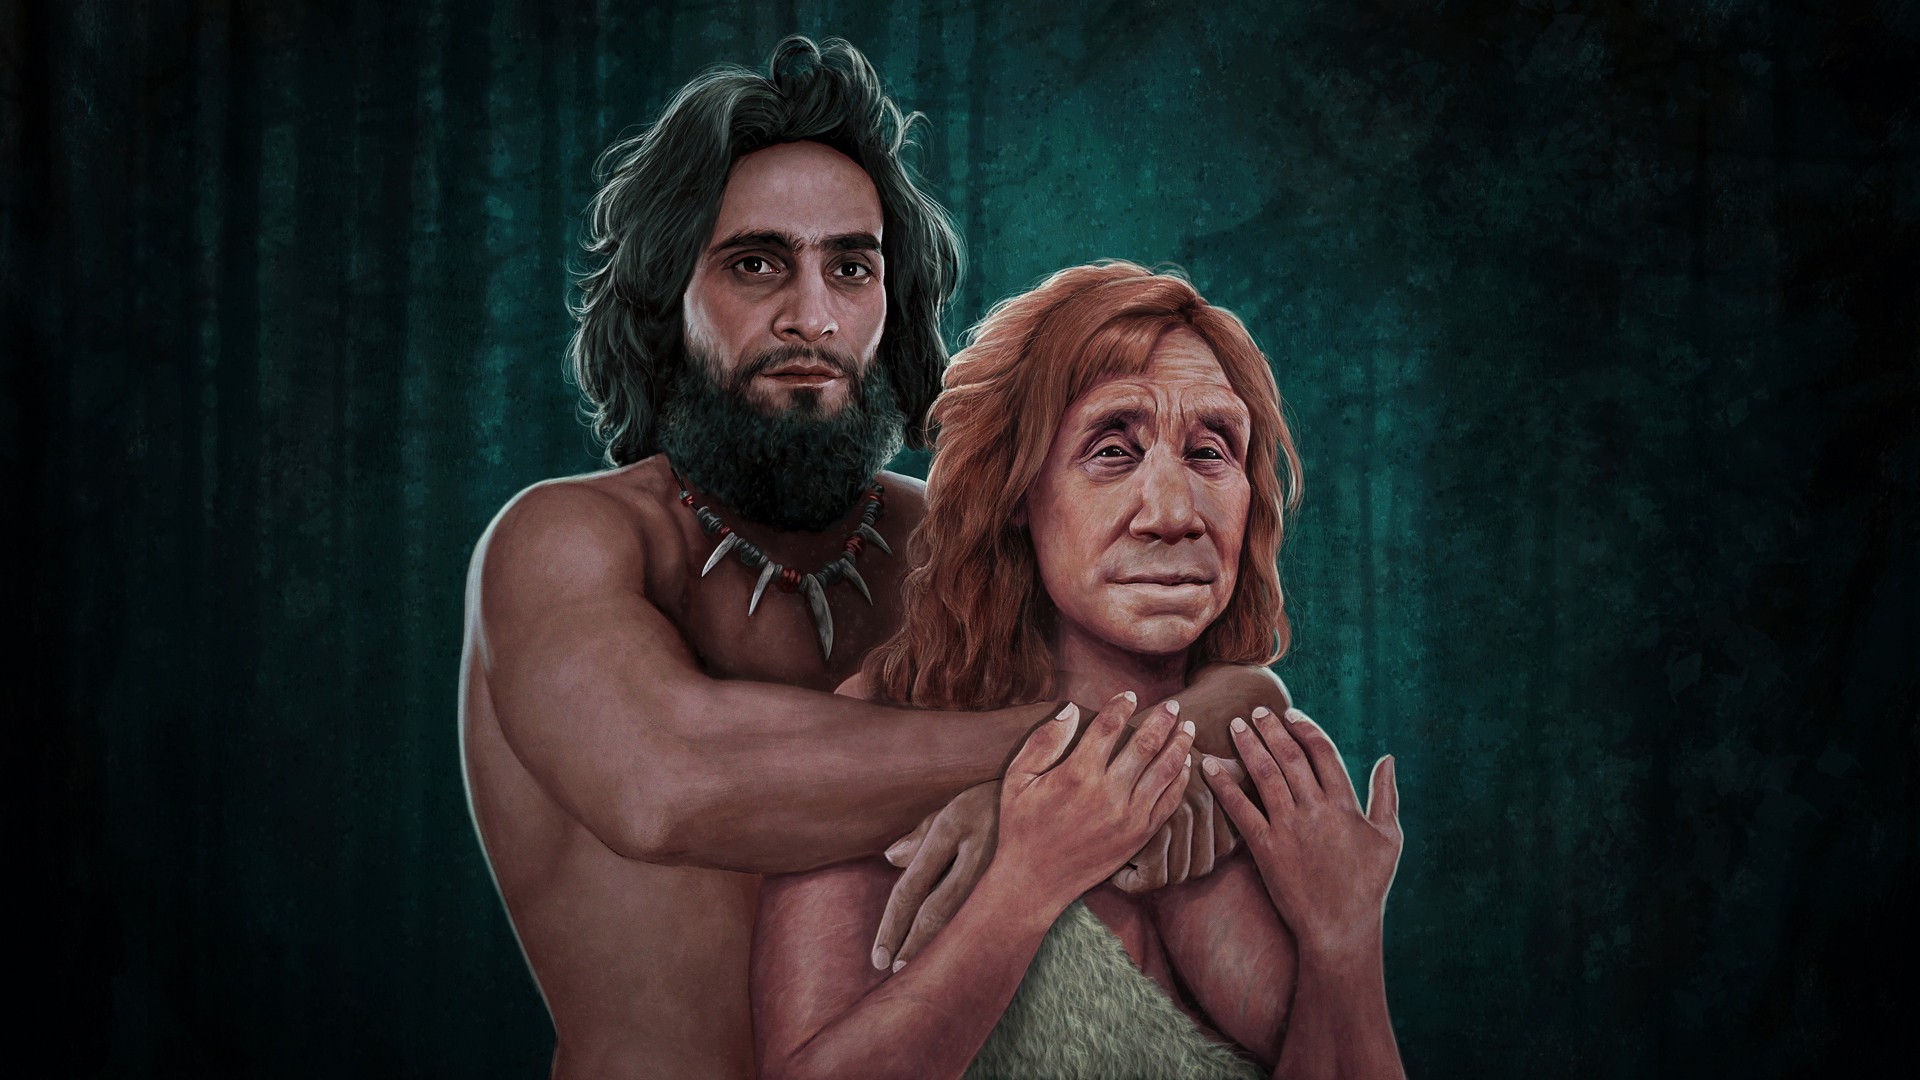 Illustration of an early modern man embracing a Neanderthal woman. They appear to be in a forest at night. The moonlight is shining through the trees just behind them